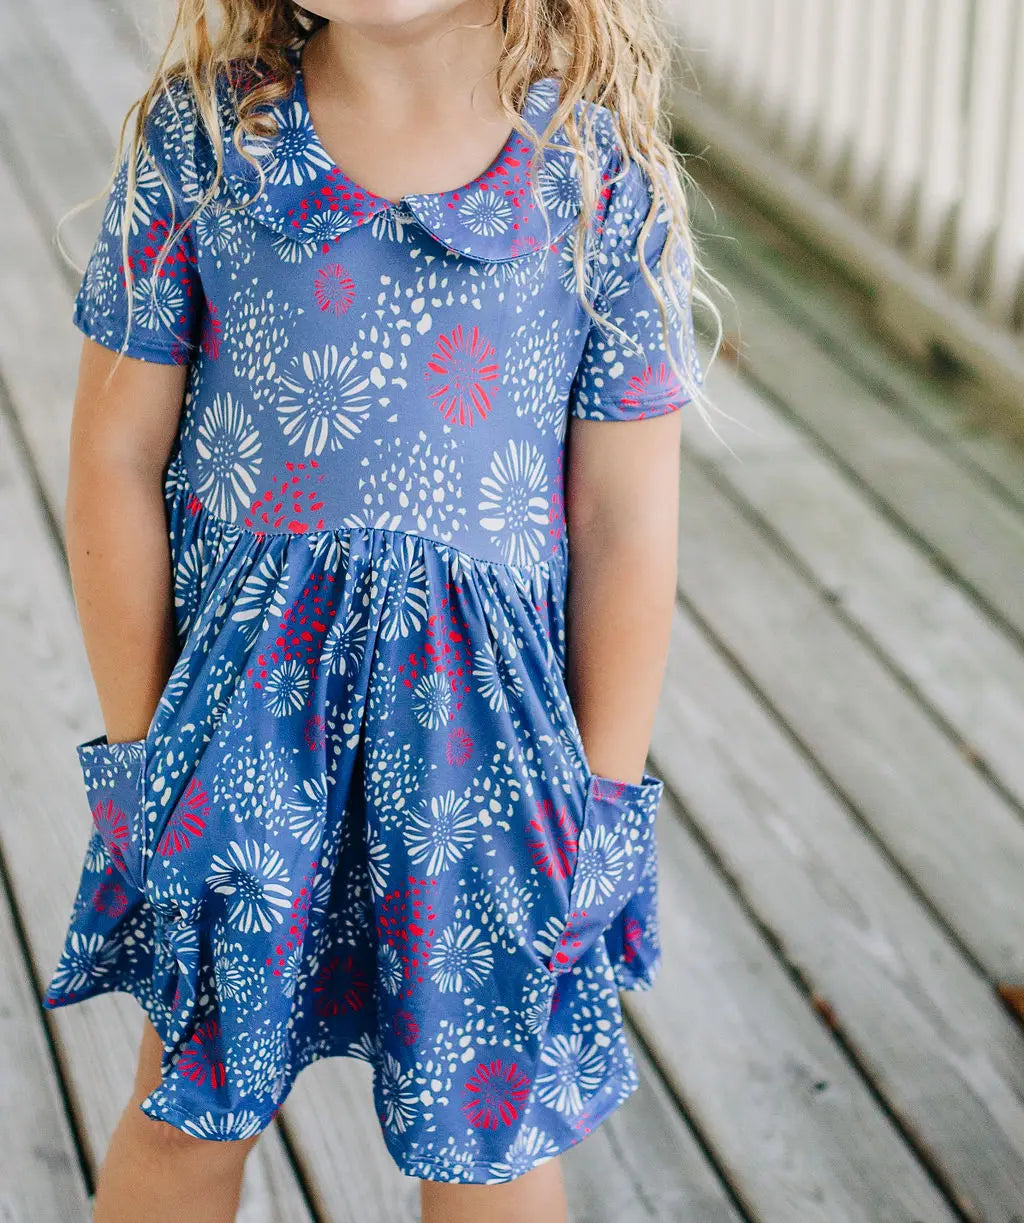 A little girl, wearing the Fireworks Twirl Dress by Sugar Bee Clothing, is standing on a wooden deck.